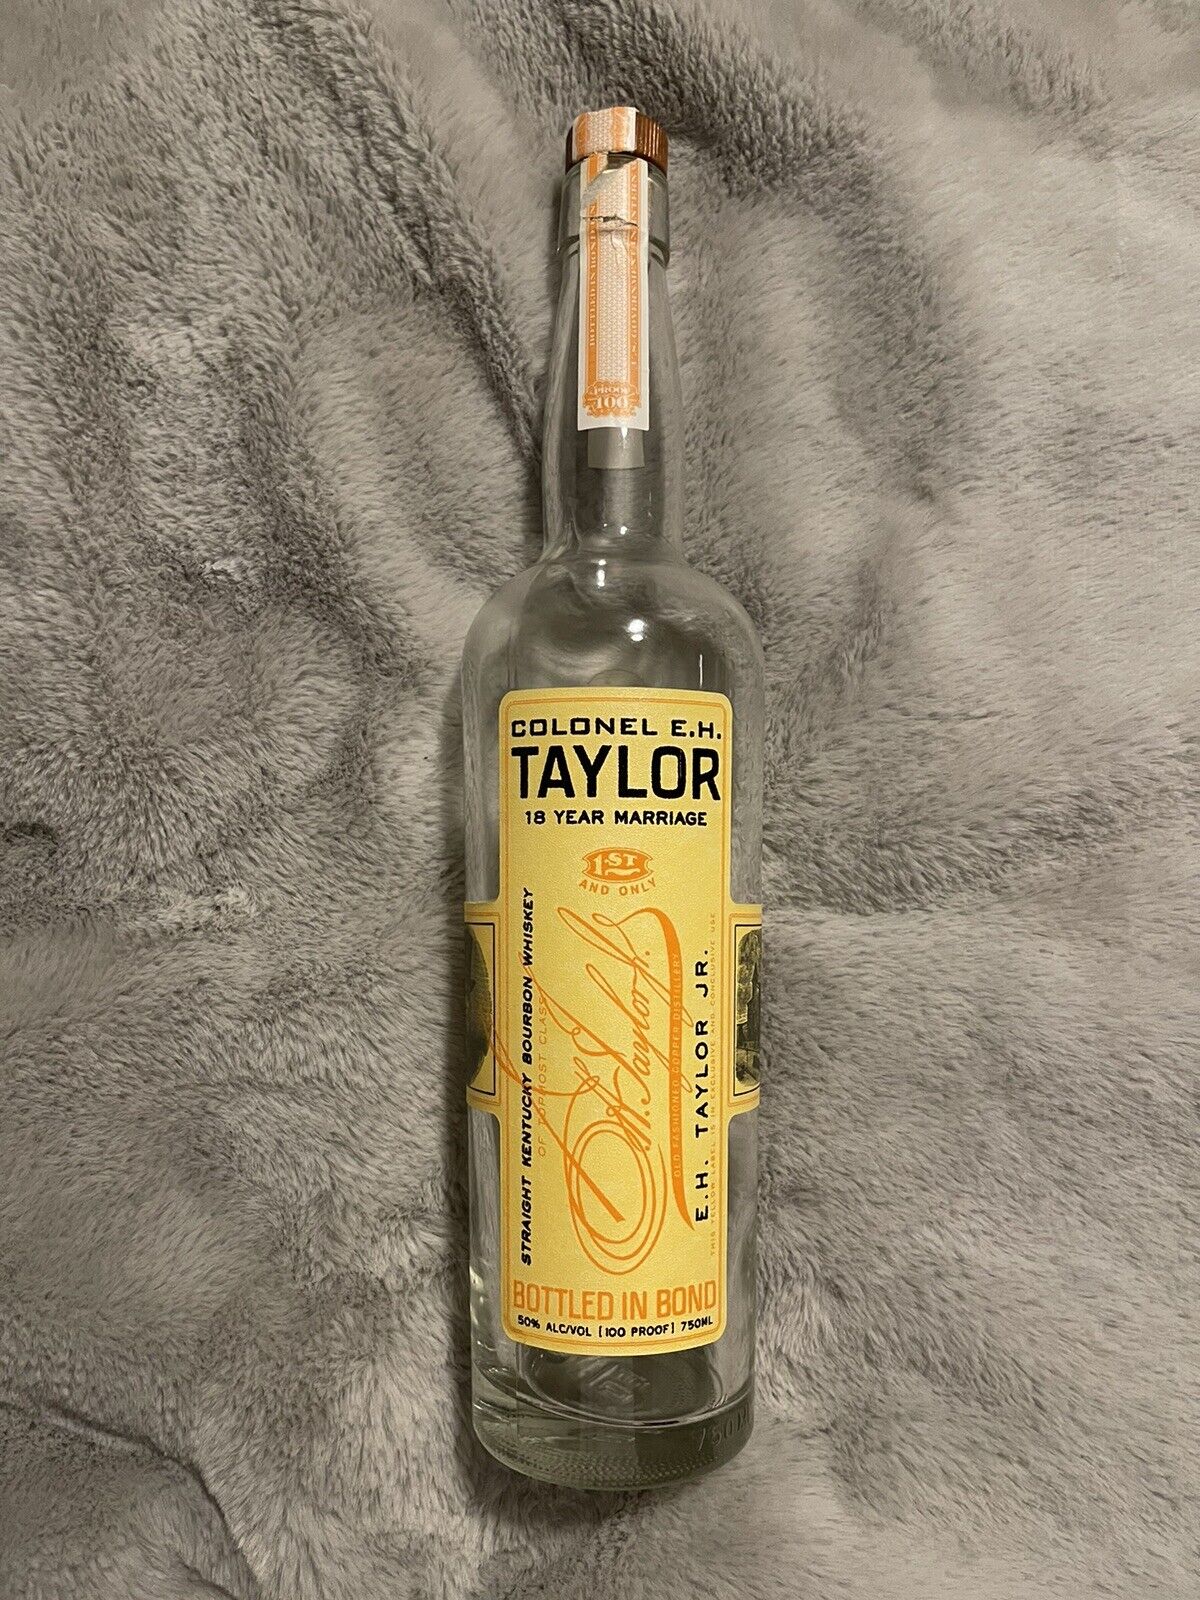 Colonel E H Taylor 18 Year Marriage Empty Bottle Unrinsed